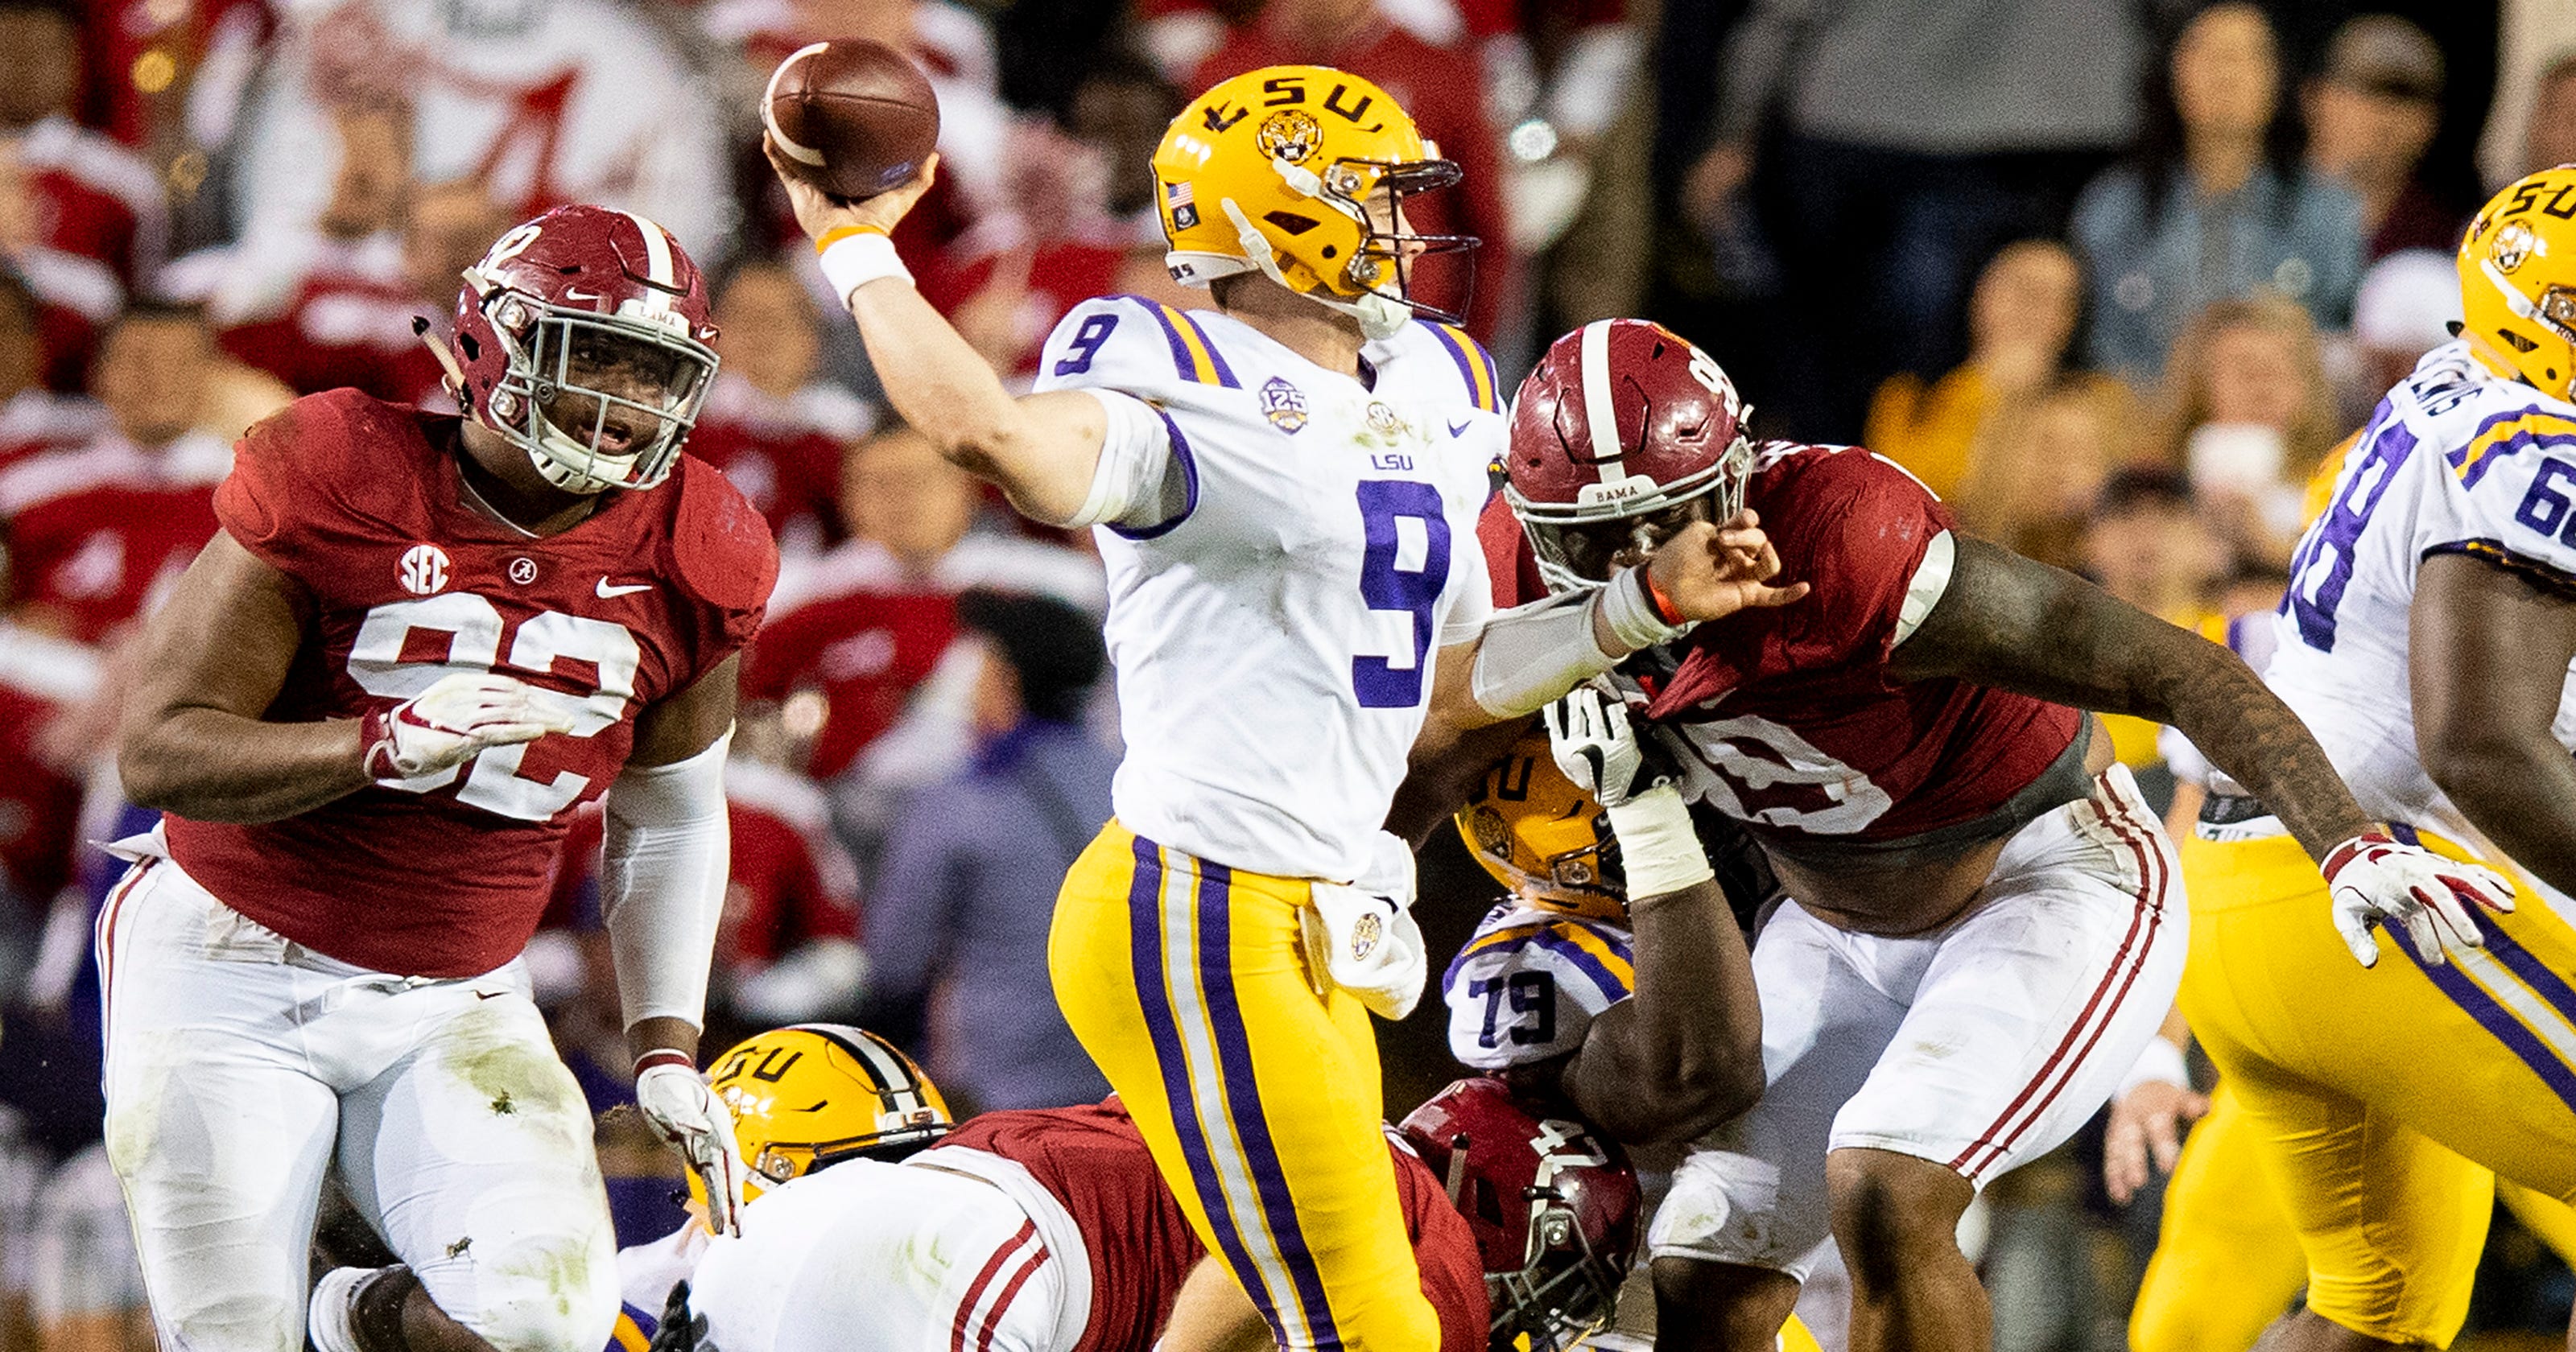 Alabama vs LSU Final score ends in shutout loss for the Tigers